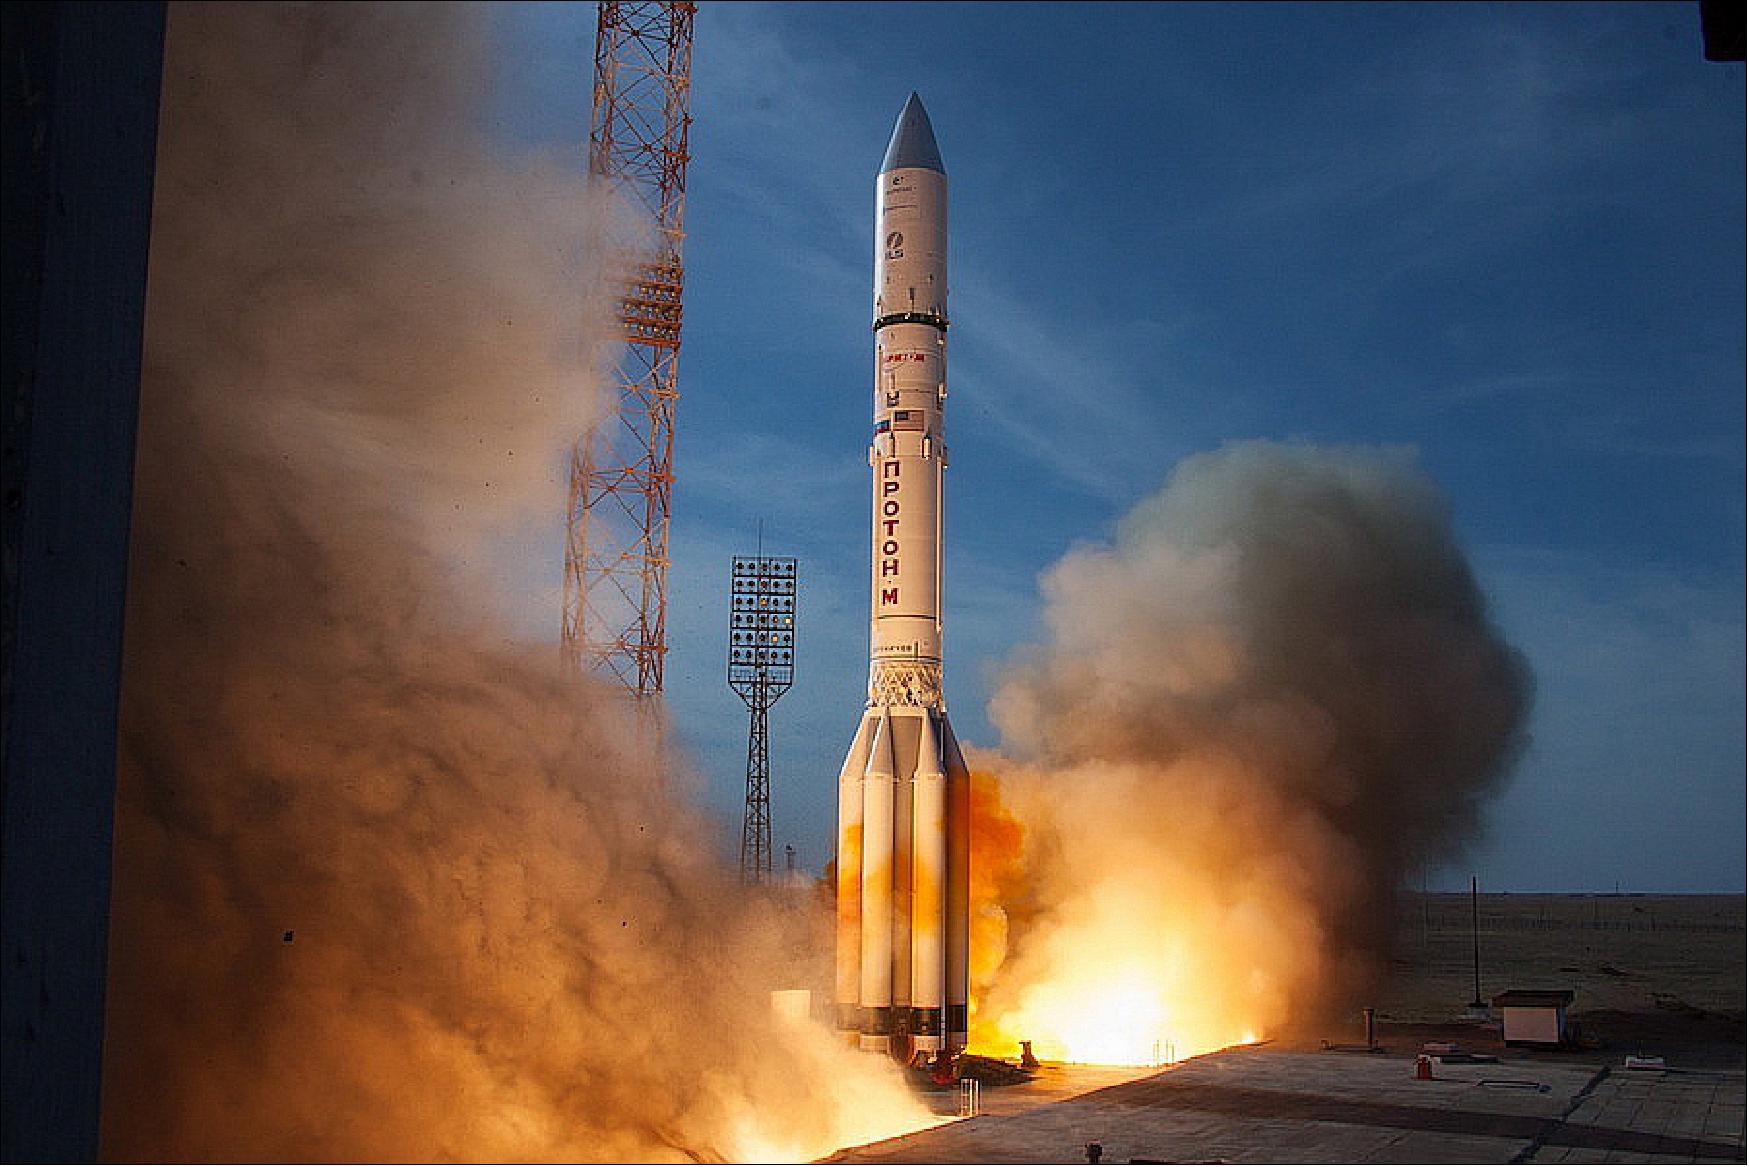 Figure 4: A Proton rocket with a Breeze M upper stage lifted off from the Baikonur Cosmodrome in Kazakhstan at 6:17:56 a.m. EDT (10:17:56 GMT) on 9 October 2019 (image Credit: Roscosmos) 13)